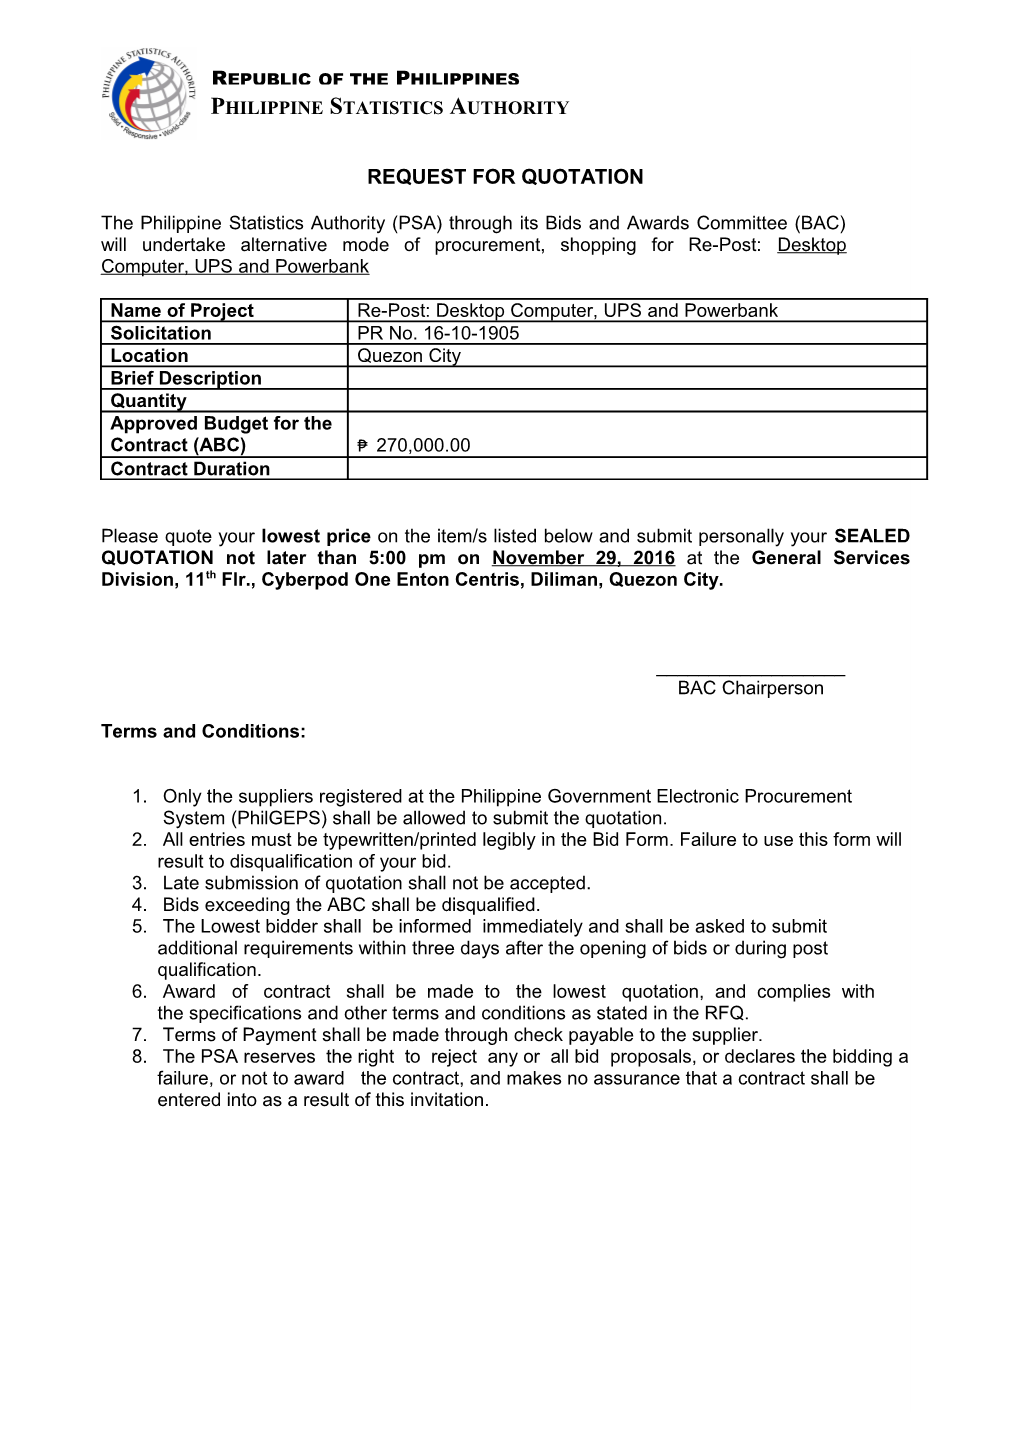 Request for Quotation s35